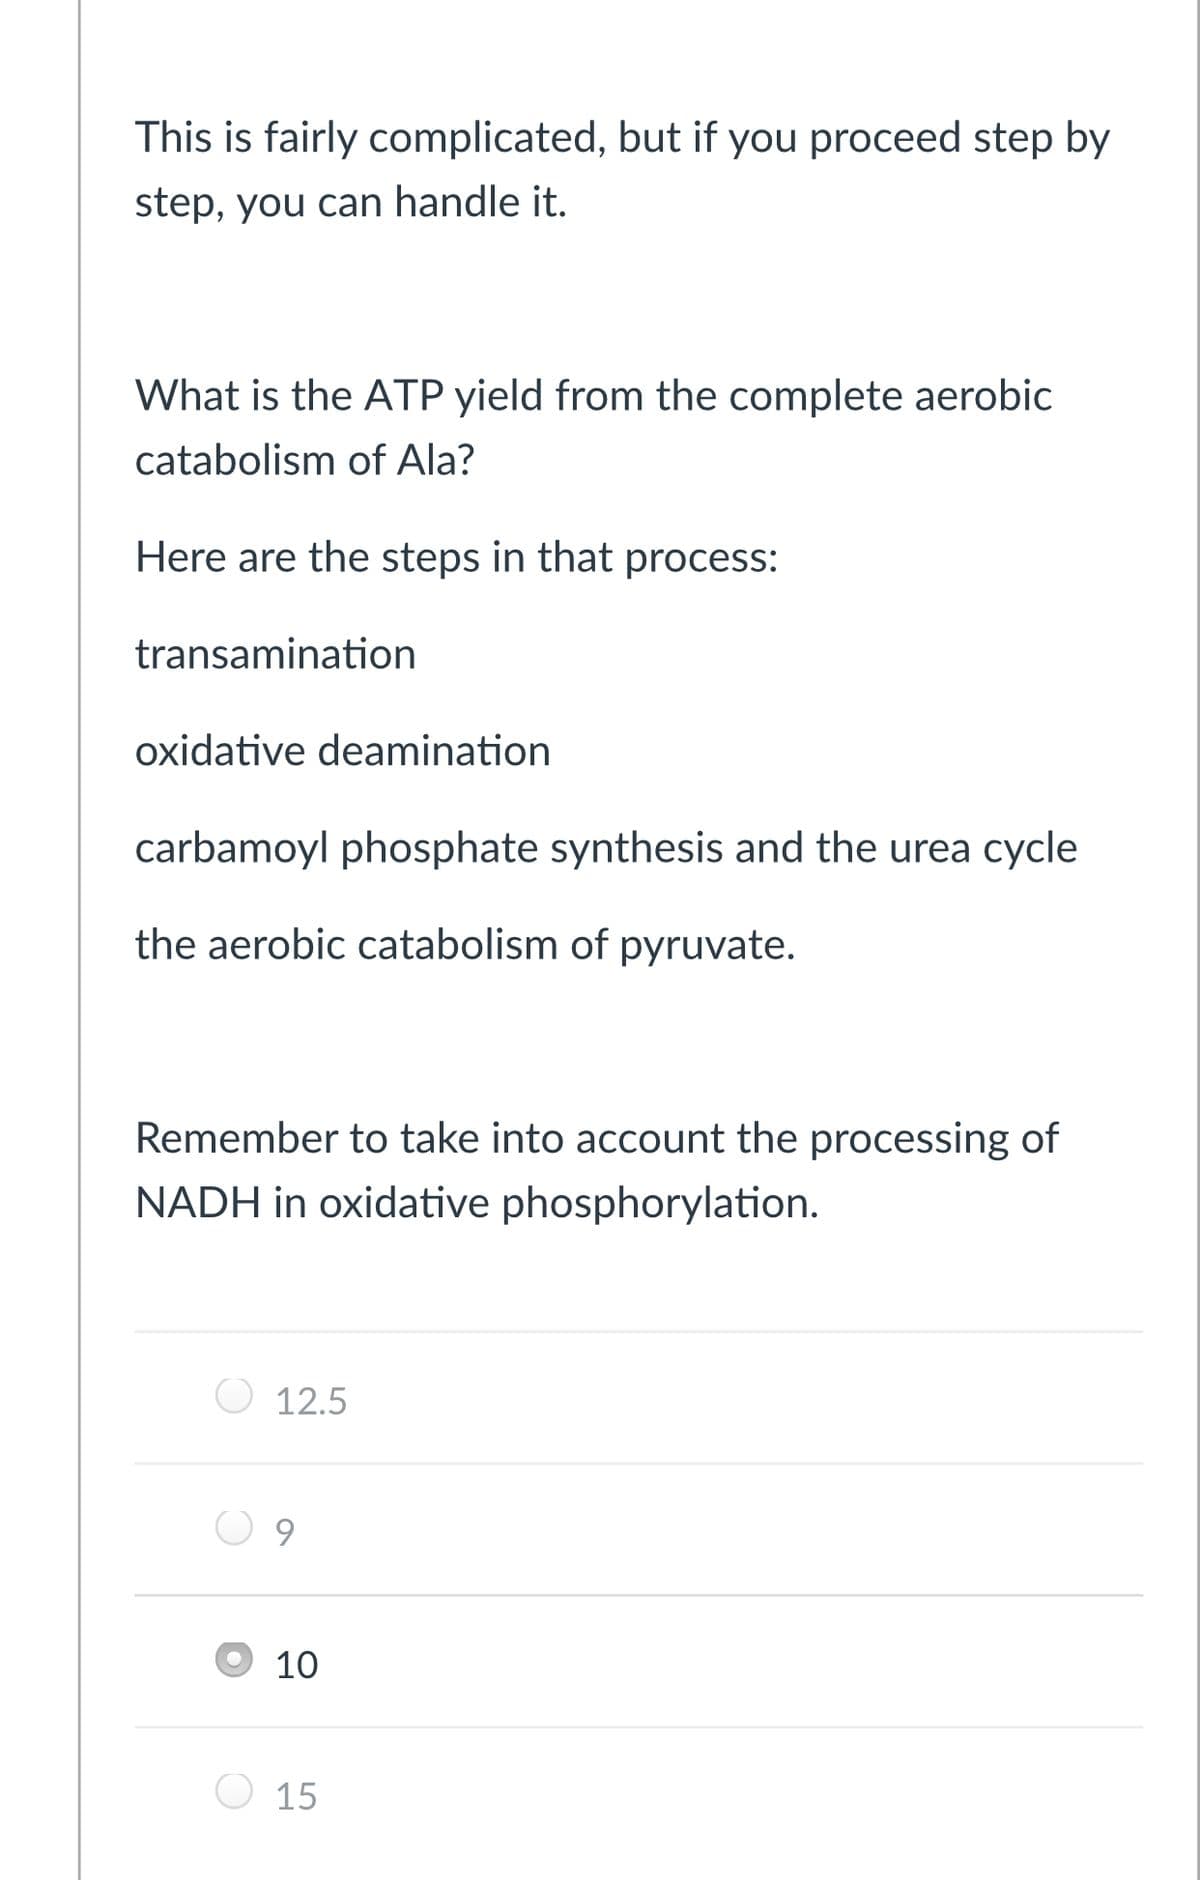 This is fairly complicated, but if you proceed step by
step, you can handle it.
What is the ATP yield from the complete aerobic
catabolism of Ala?
Here are the steps in that process:
transamination
oxidative deamination
carbamoyl phosphate synthesis and the urea cycle
the aerobic catabolism of pyruvate.
Remember to take into account the processing of
NADH in oxidative phosphorylation.
12.5
9.
10
15
